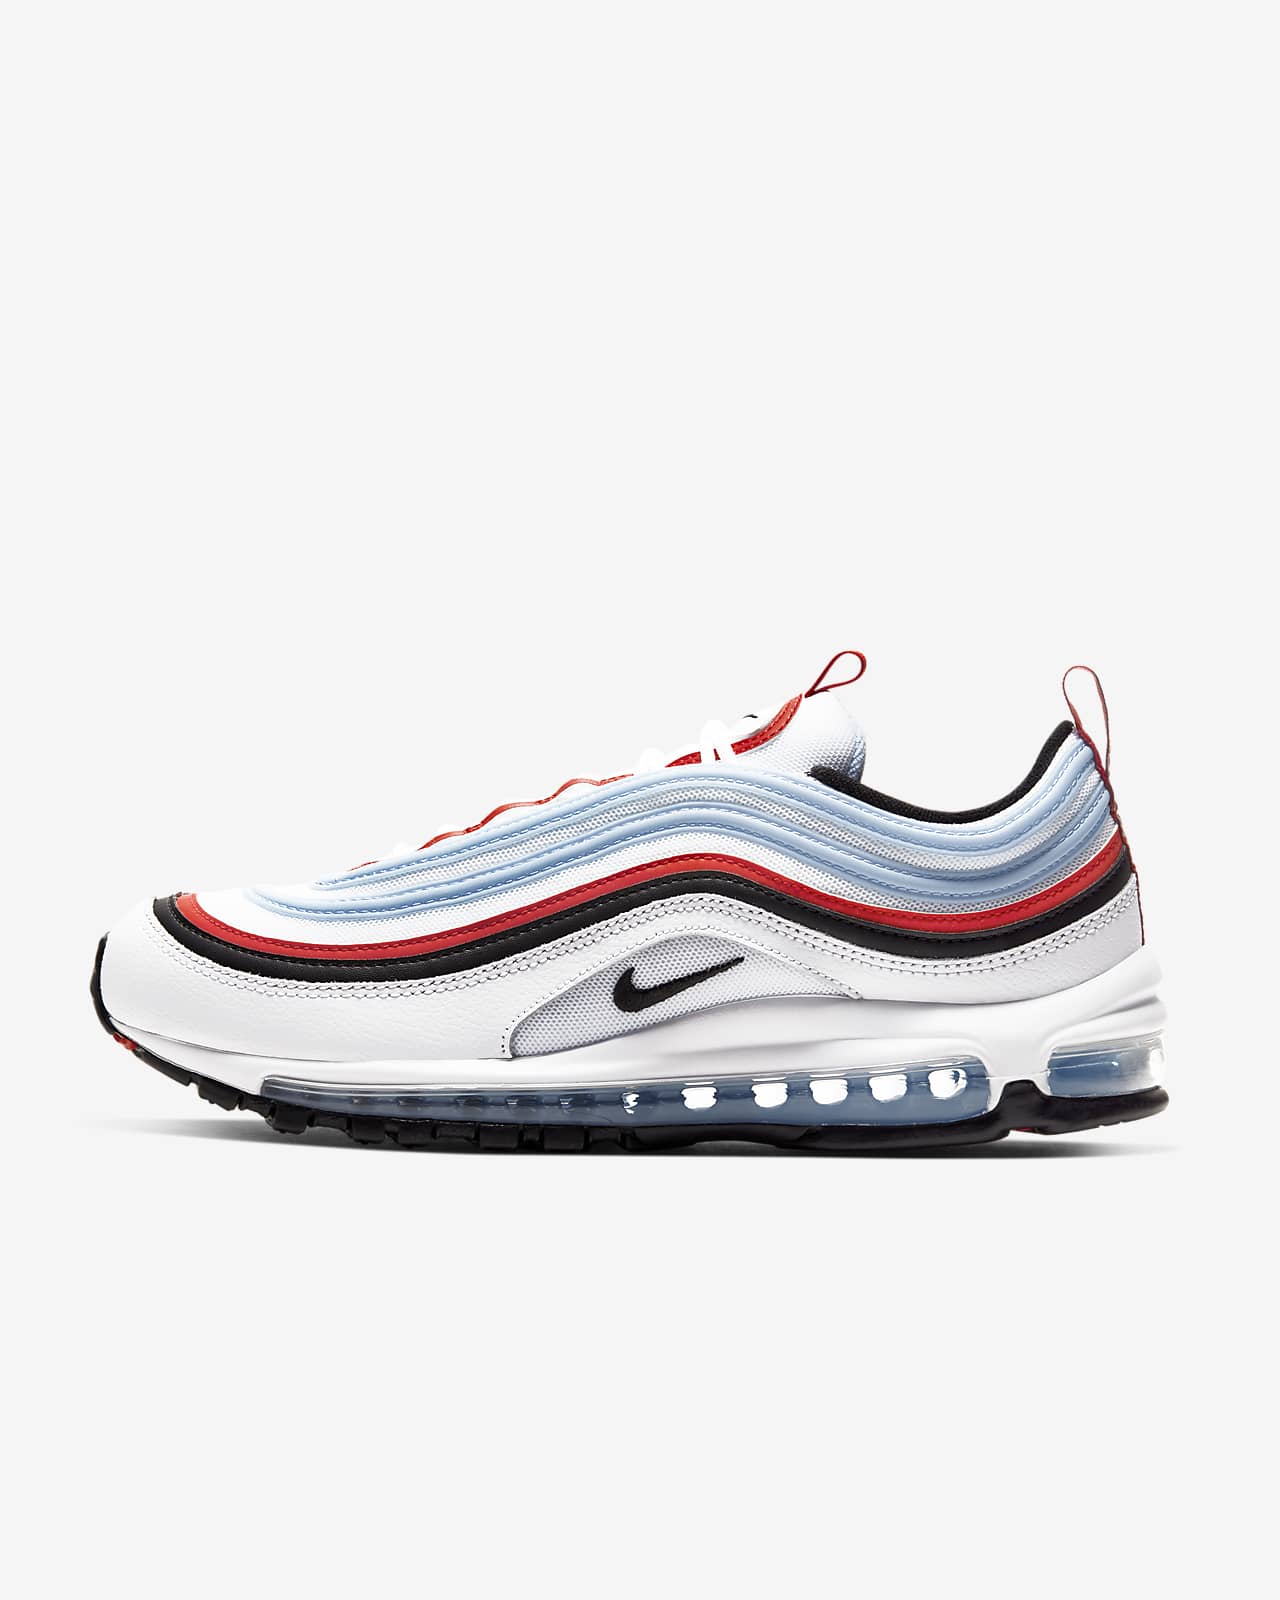 Nike Air Max 97 (Chicago) Men's Shoes